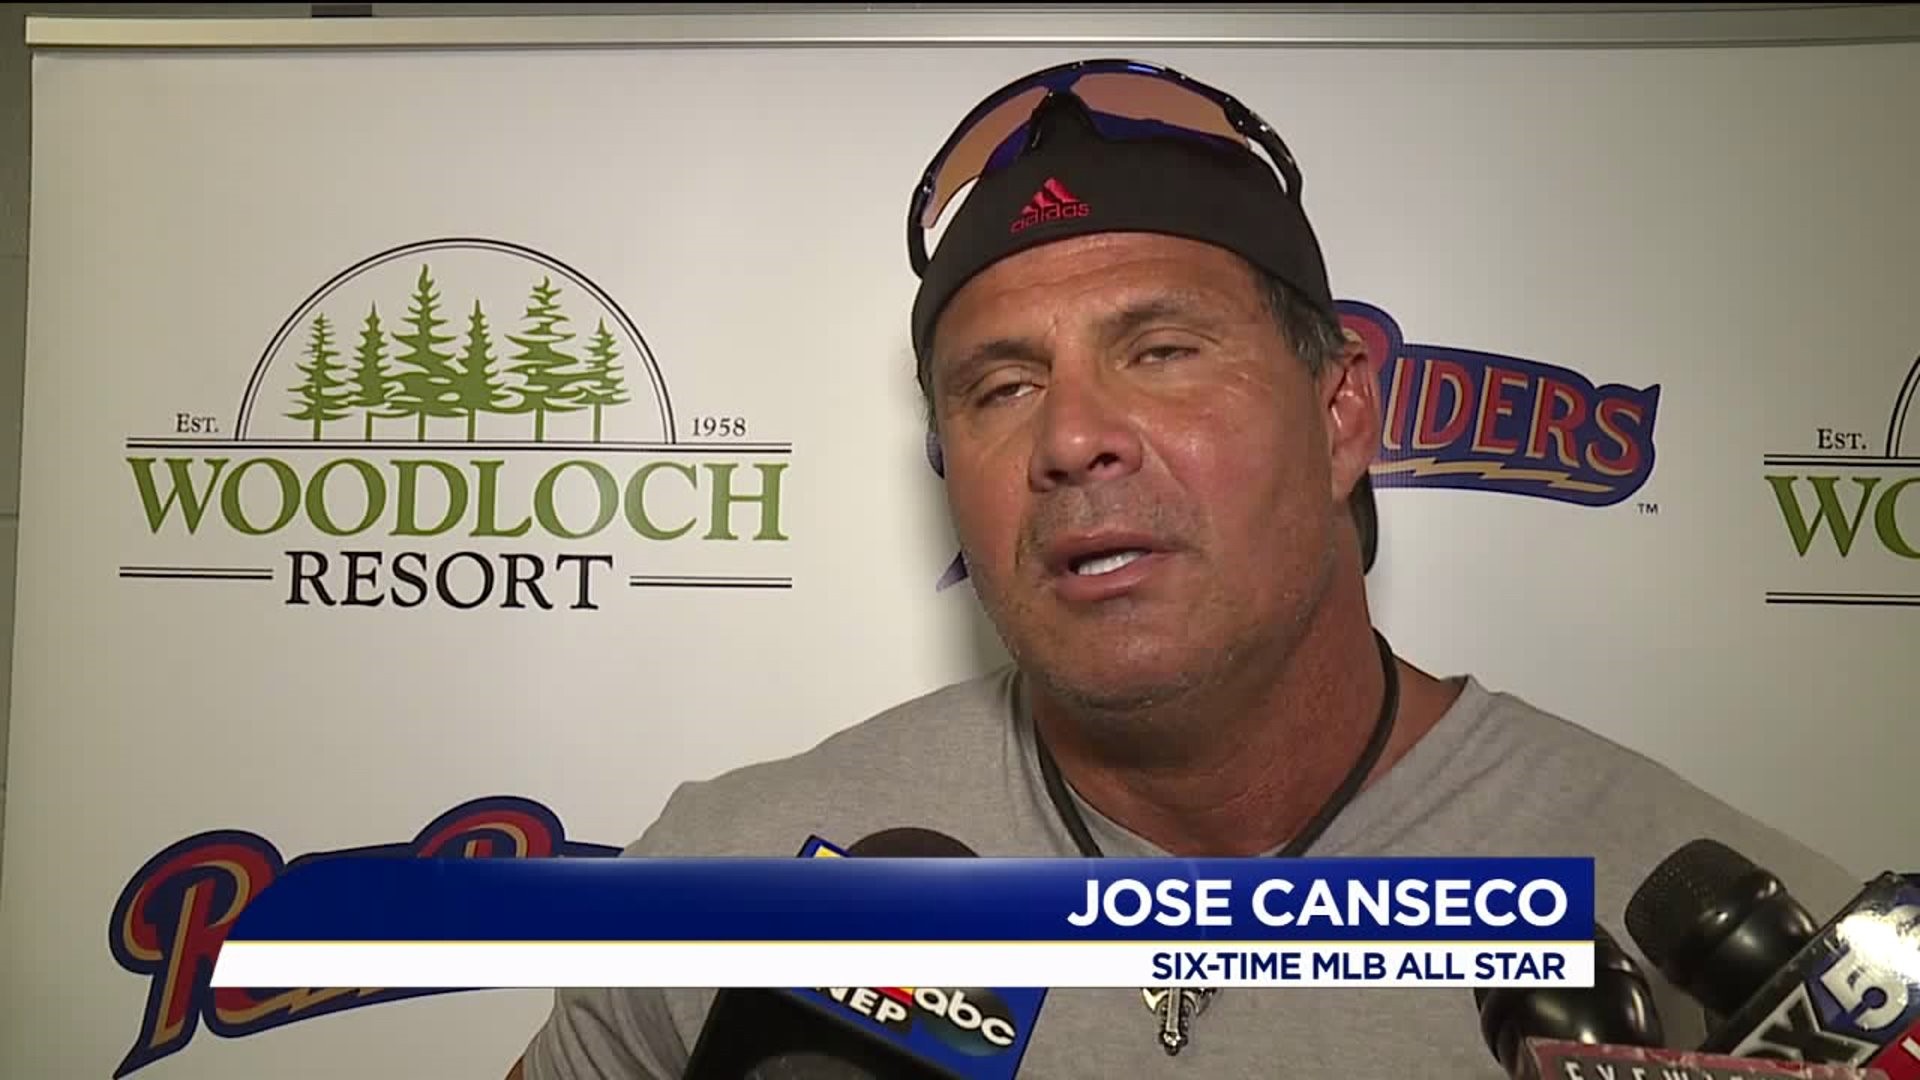 Jose Canseco at PNC Field